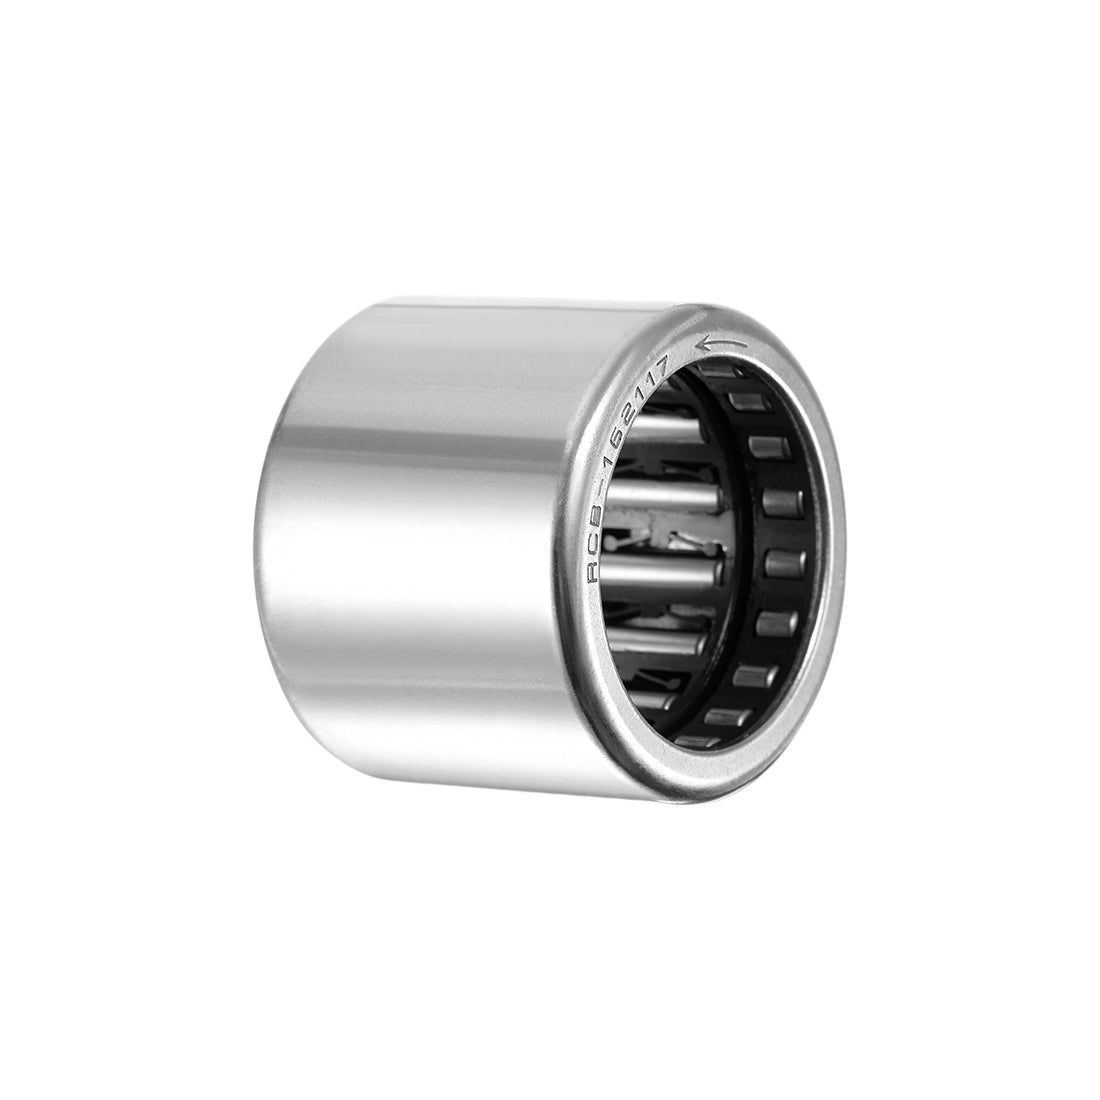 uxcell Uxcell RCB121616 Needle Roller Bearings, One Way Bearing, 3/4" Bore 1" OD 1" Width